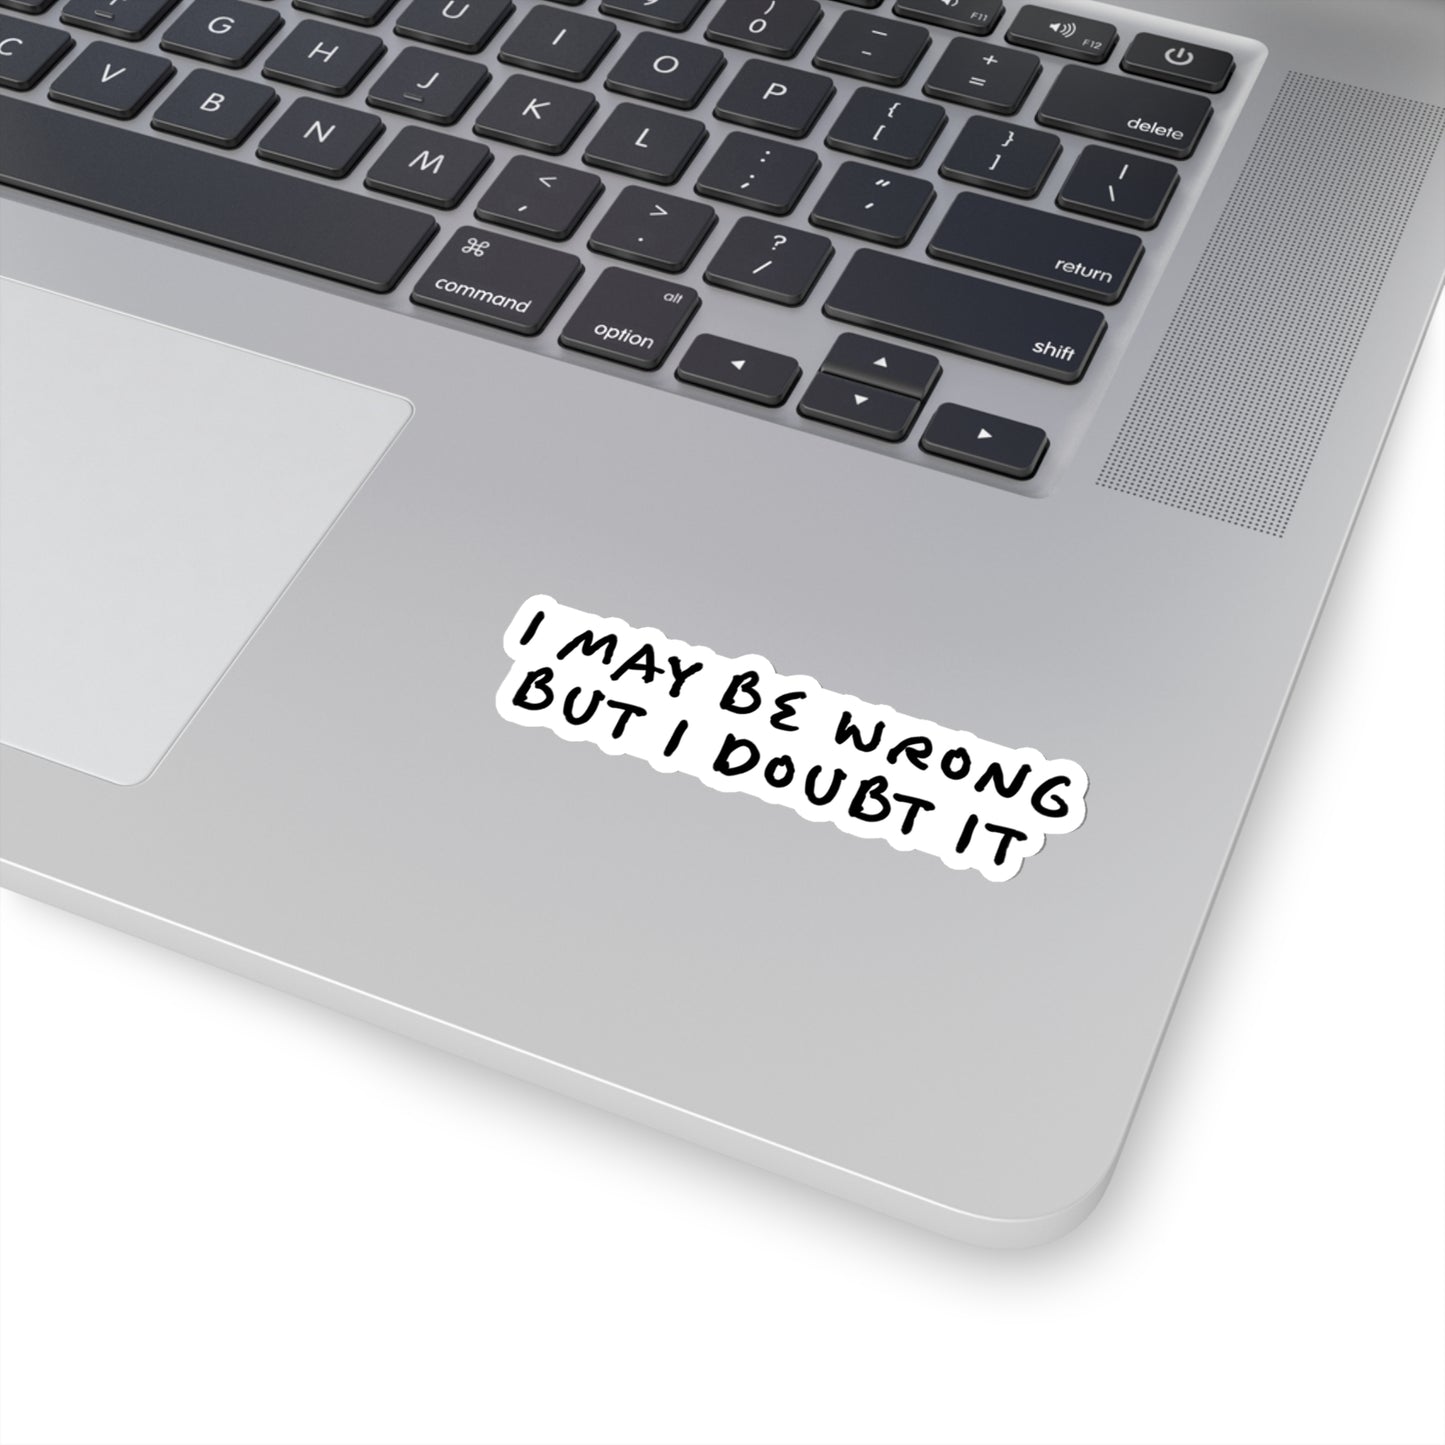 I May Be Wrong, But I Doubt It, Funny Sticker, Sticker for Laptop, Phone, Hydroflask or Car